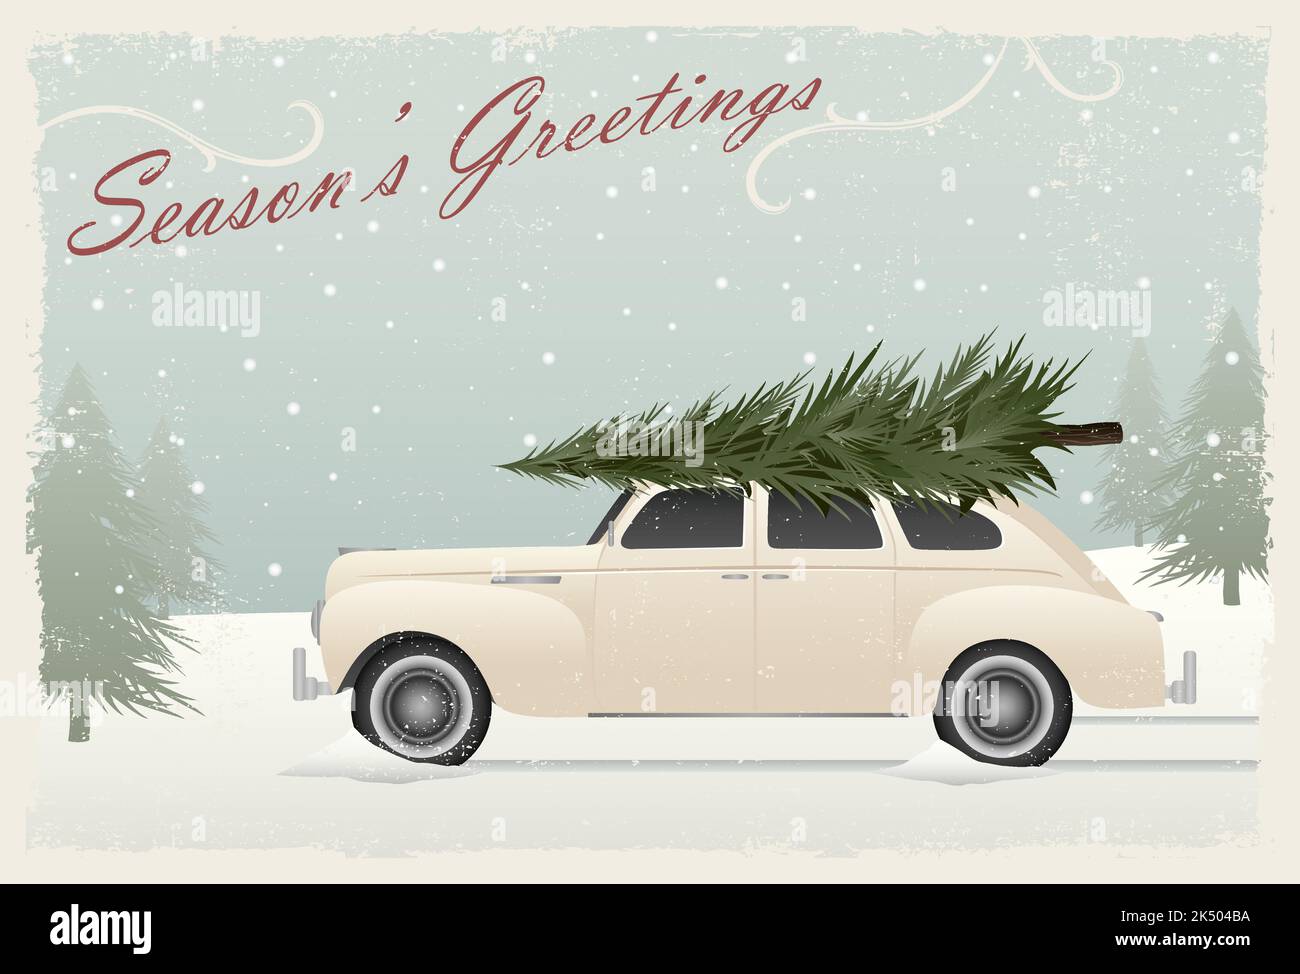 A vintage car with a Christmas tree on top, greeting card style with grunge texture Stock Vector